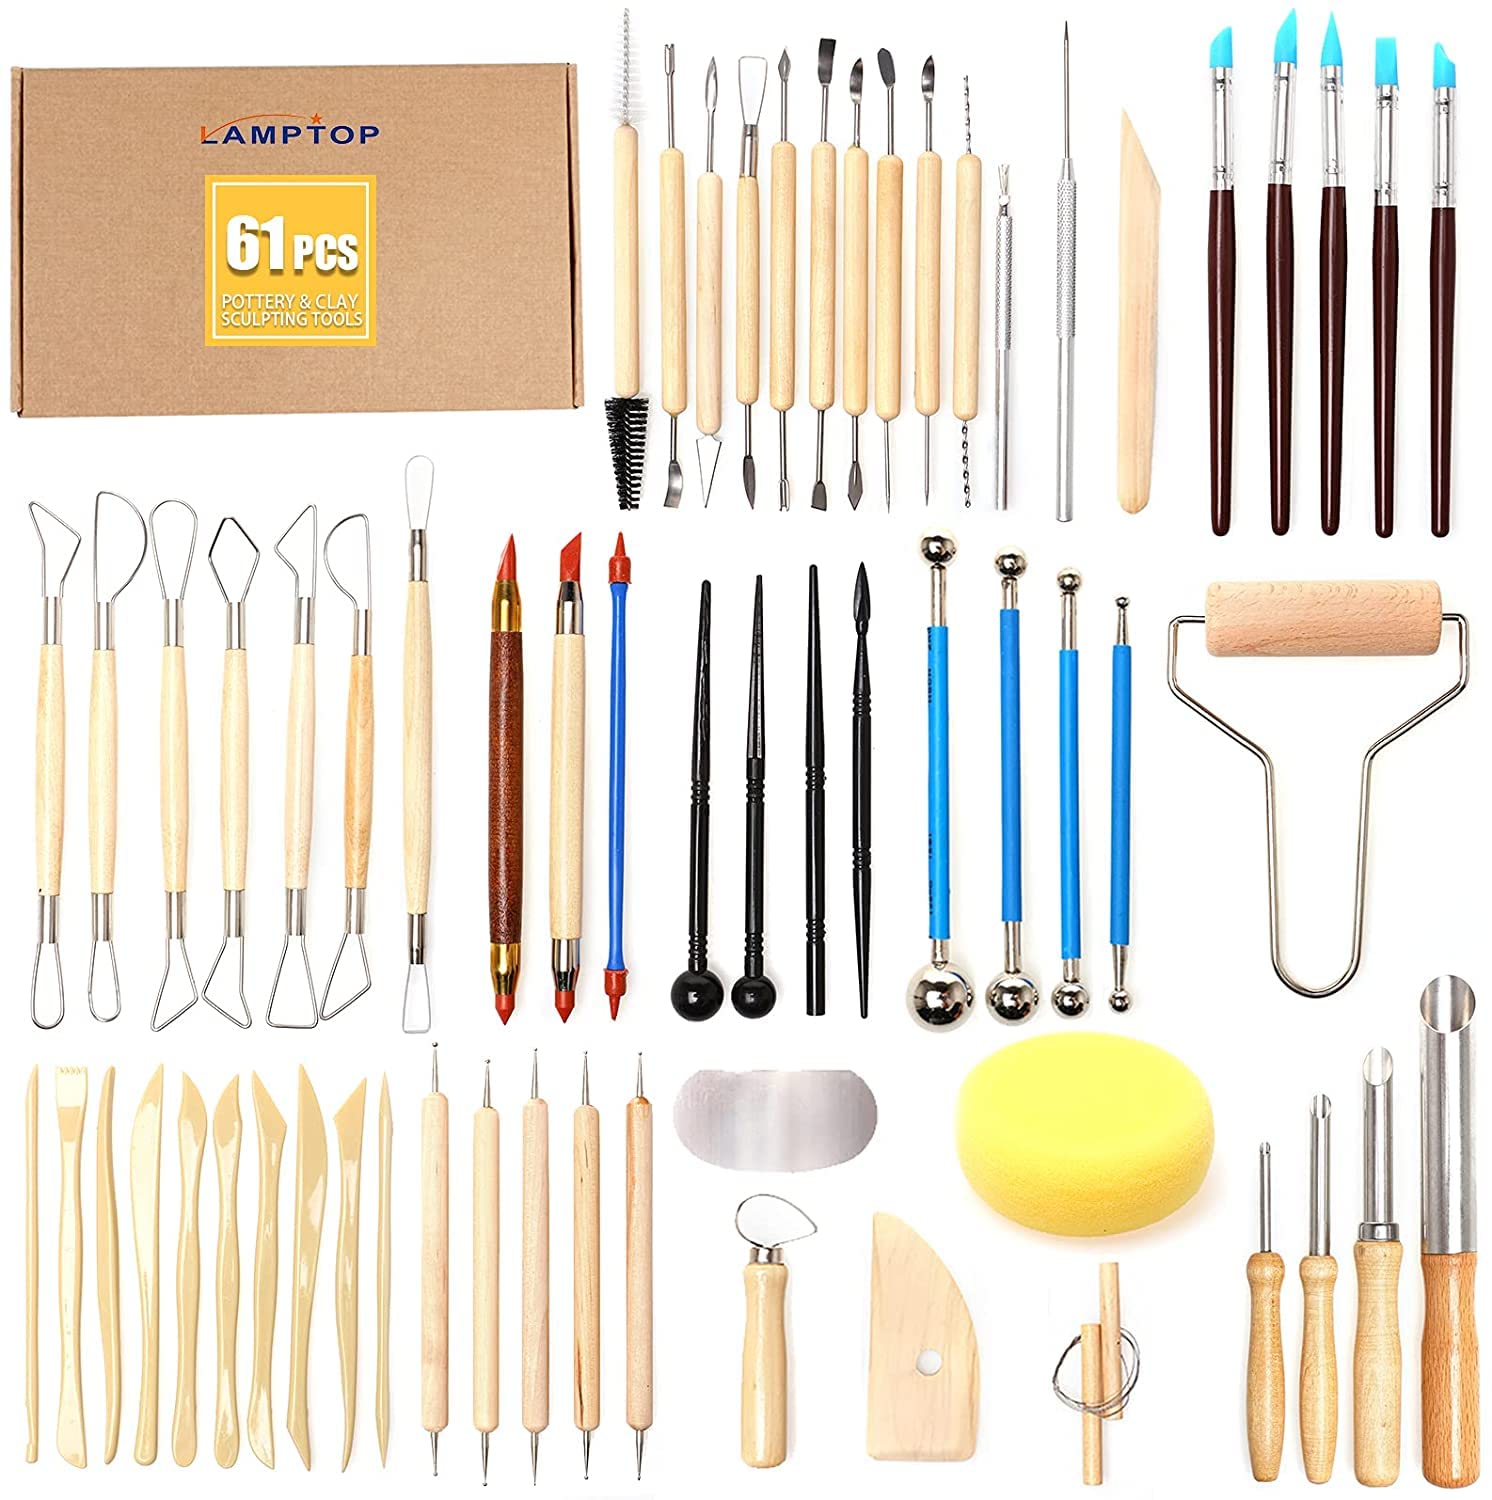 Pottery Clay Sculpting Tools Kit Ceramic Carving Tool Polymer Shaping DIY  Supplies For Beginner Professionals Pottery Modeling